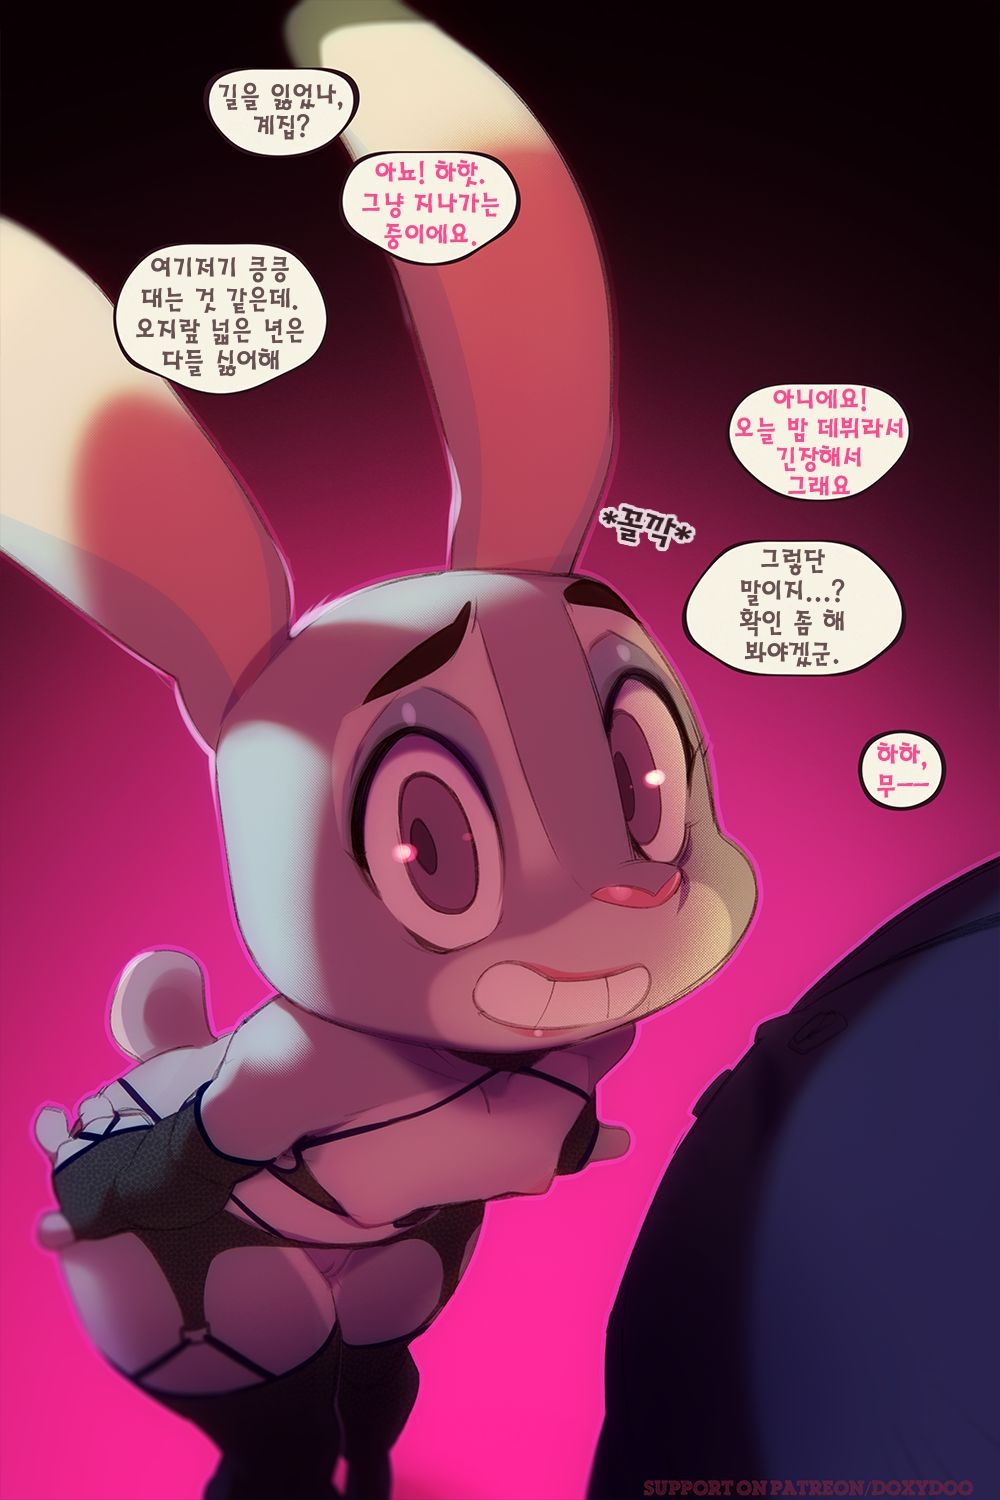 [Doxy] Sweet Sting Part 2: Down The Rabbit Hole | 달콤한 함정수사 2부: 토끼 굴속으로 (Zootopia) [Korean] [Ongoing] 26